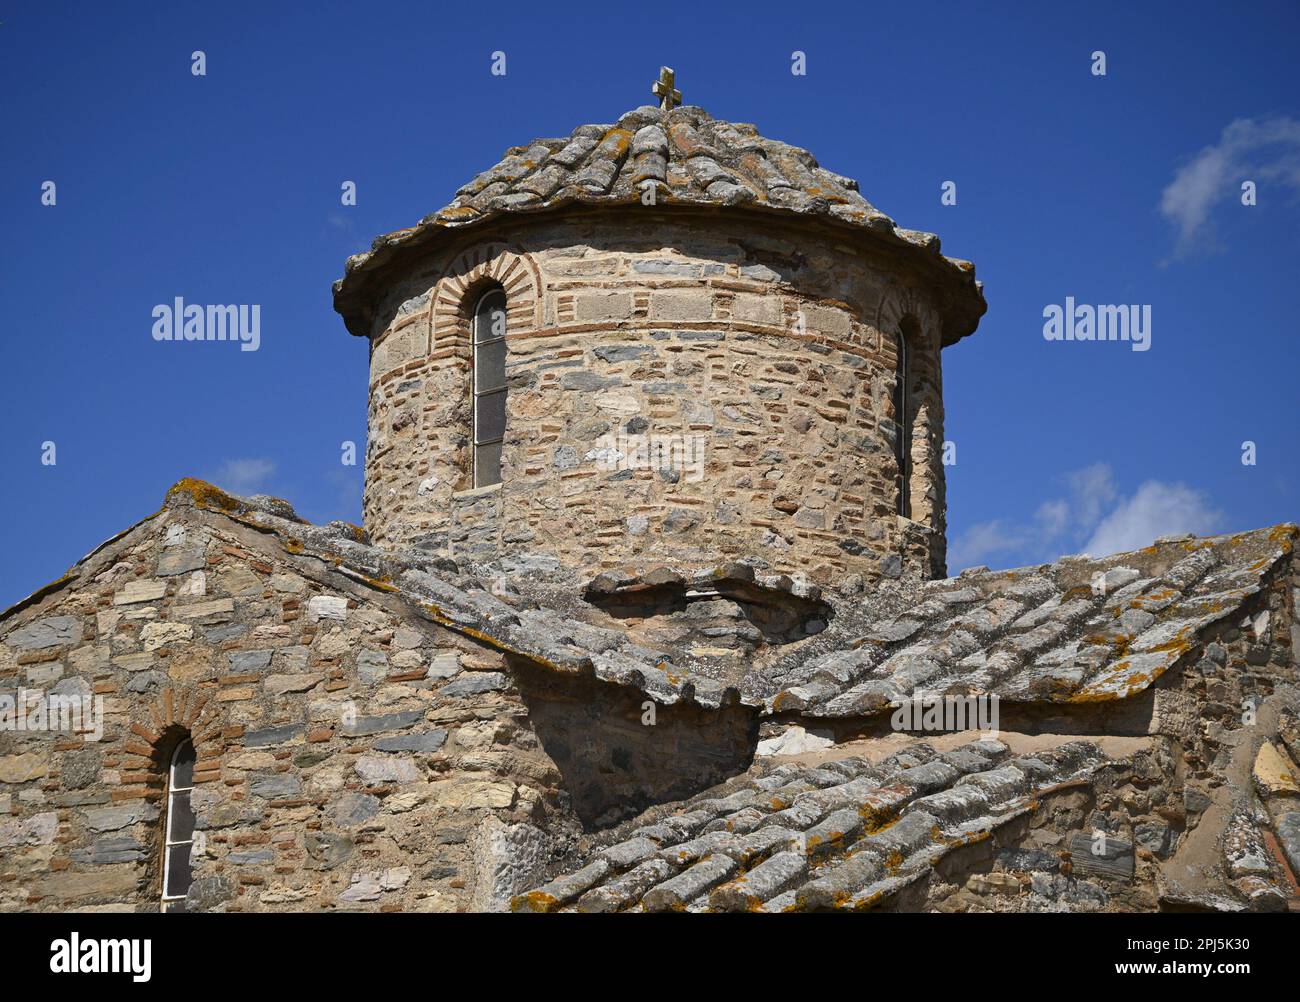 Landscape With Scenic Dome View Of Aghios Petros A 12th Century Rectangular Cruciform Byzantine Church In Kalyvia Thorikou Attica Greece 2PJ5K30 